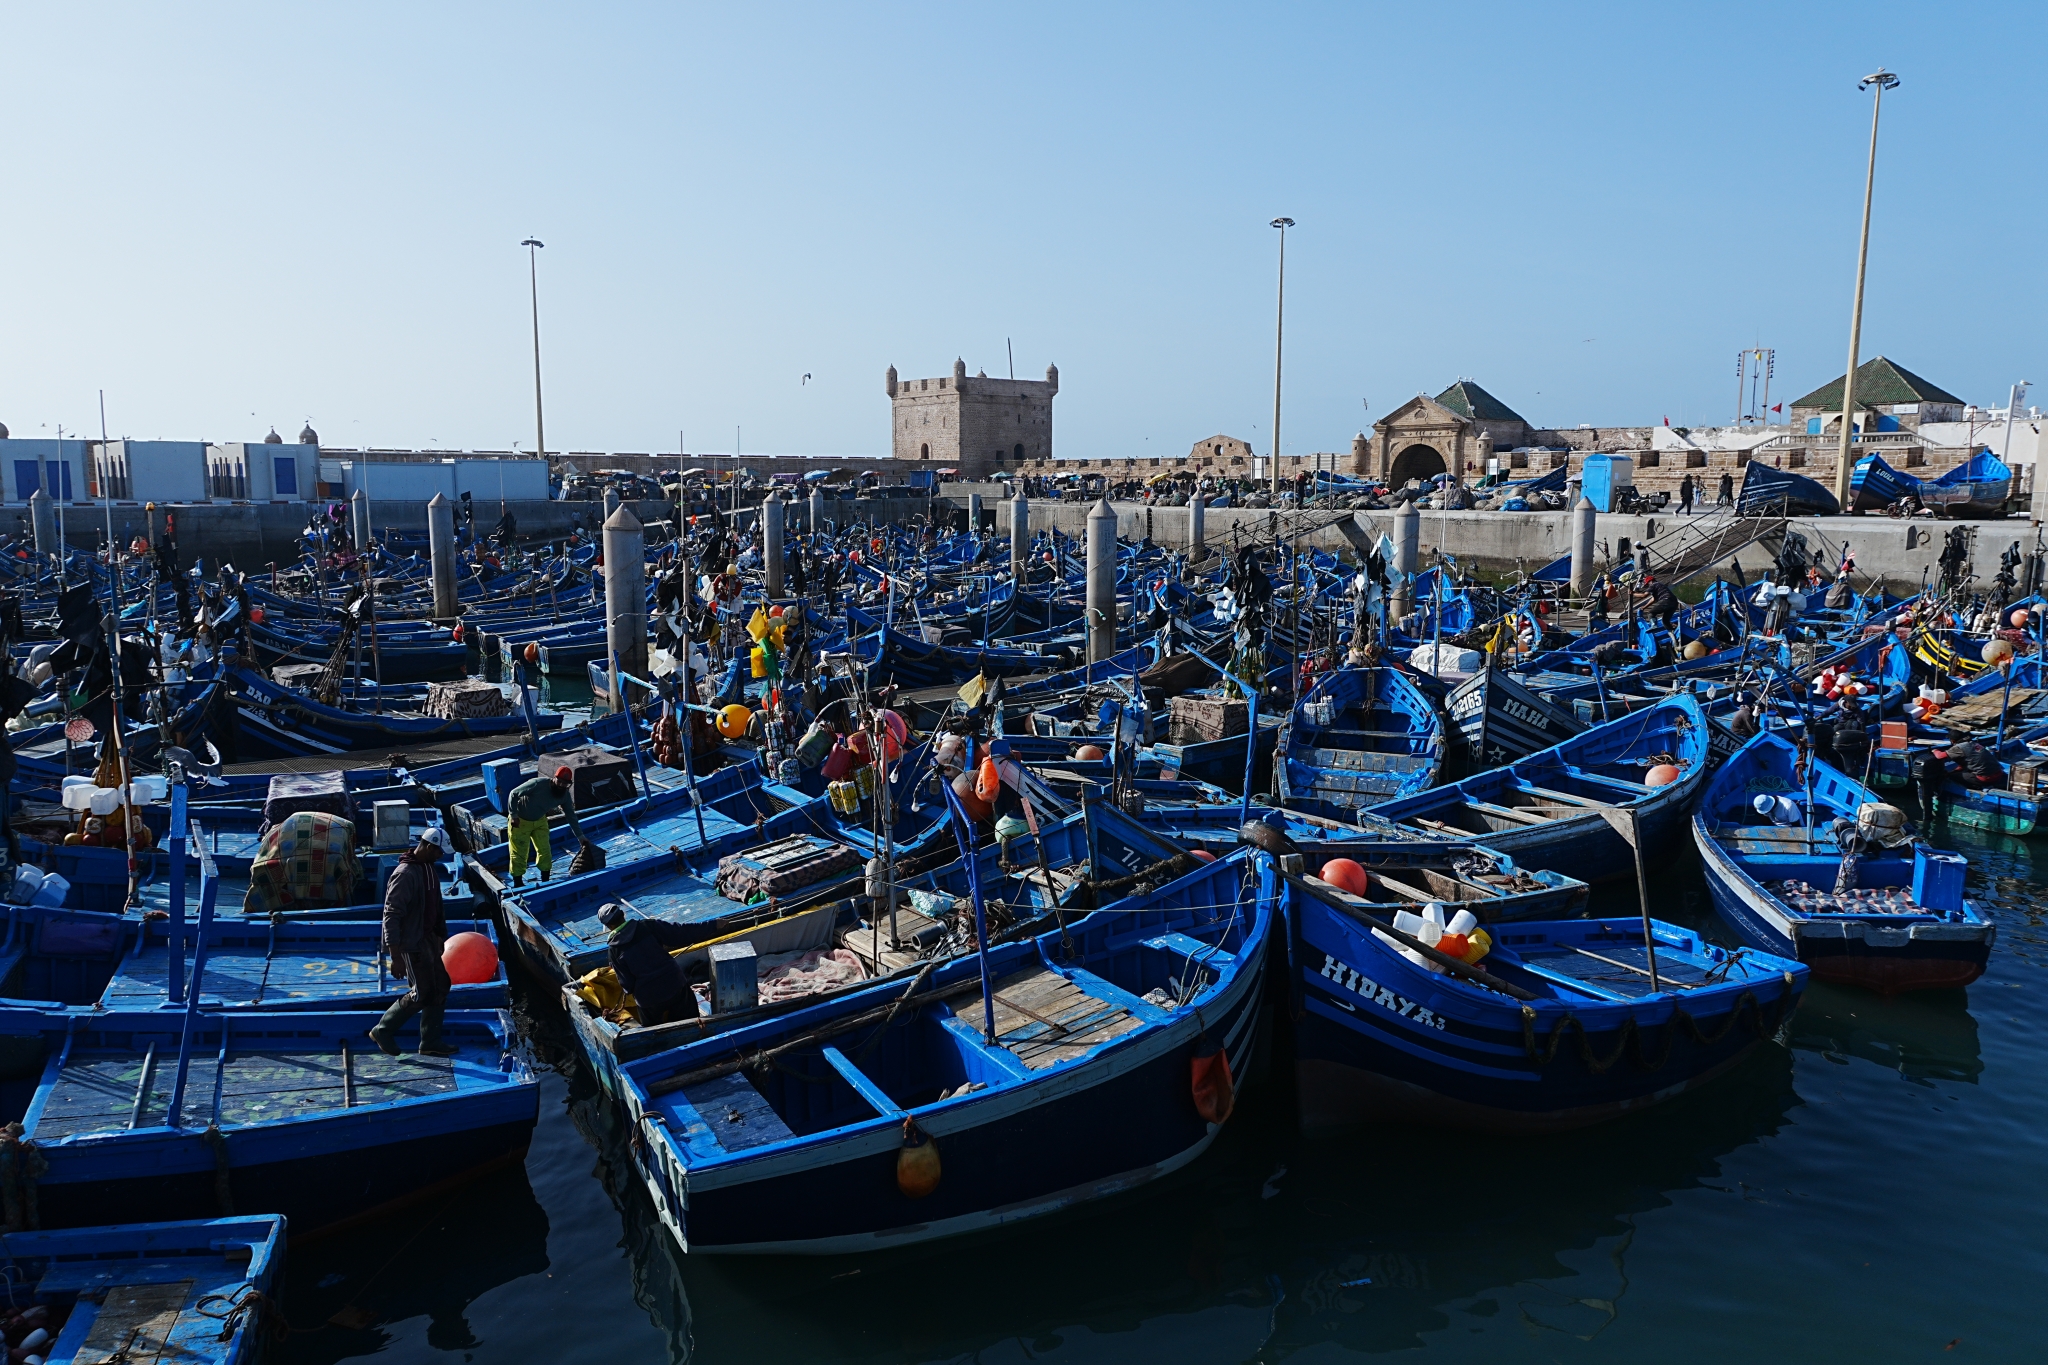 Sample image of numerous blue boats moored in the harbor, showing the resolution